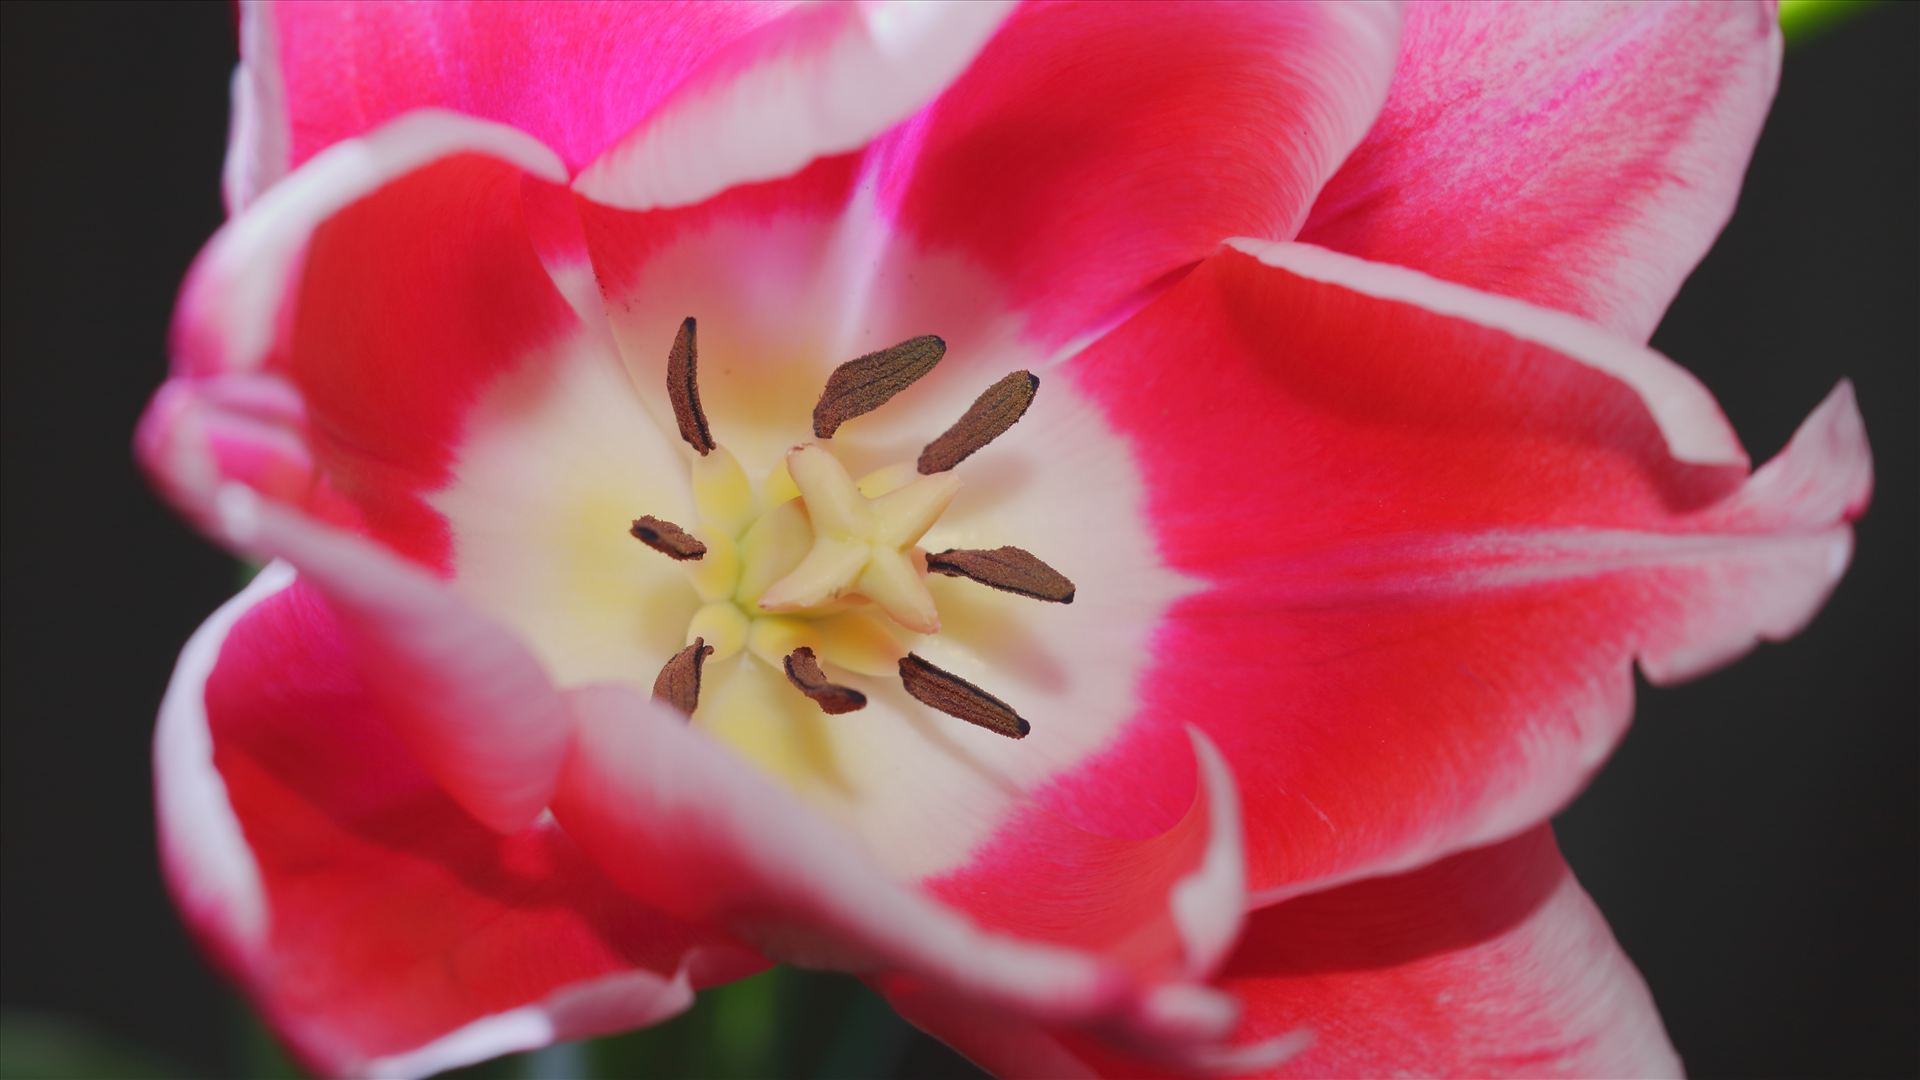 tulip.JPG - close-up picture of a tulip flower by Goomba707